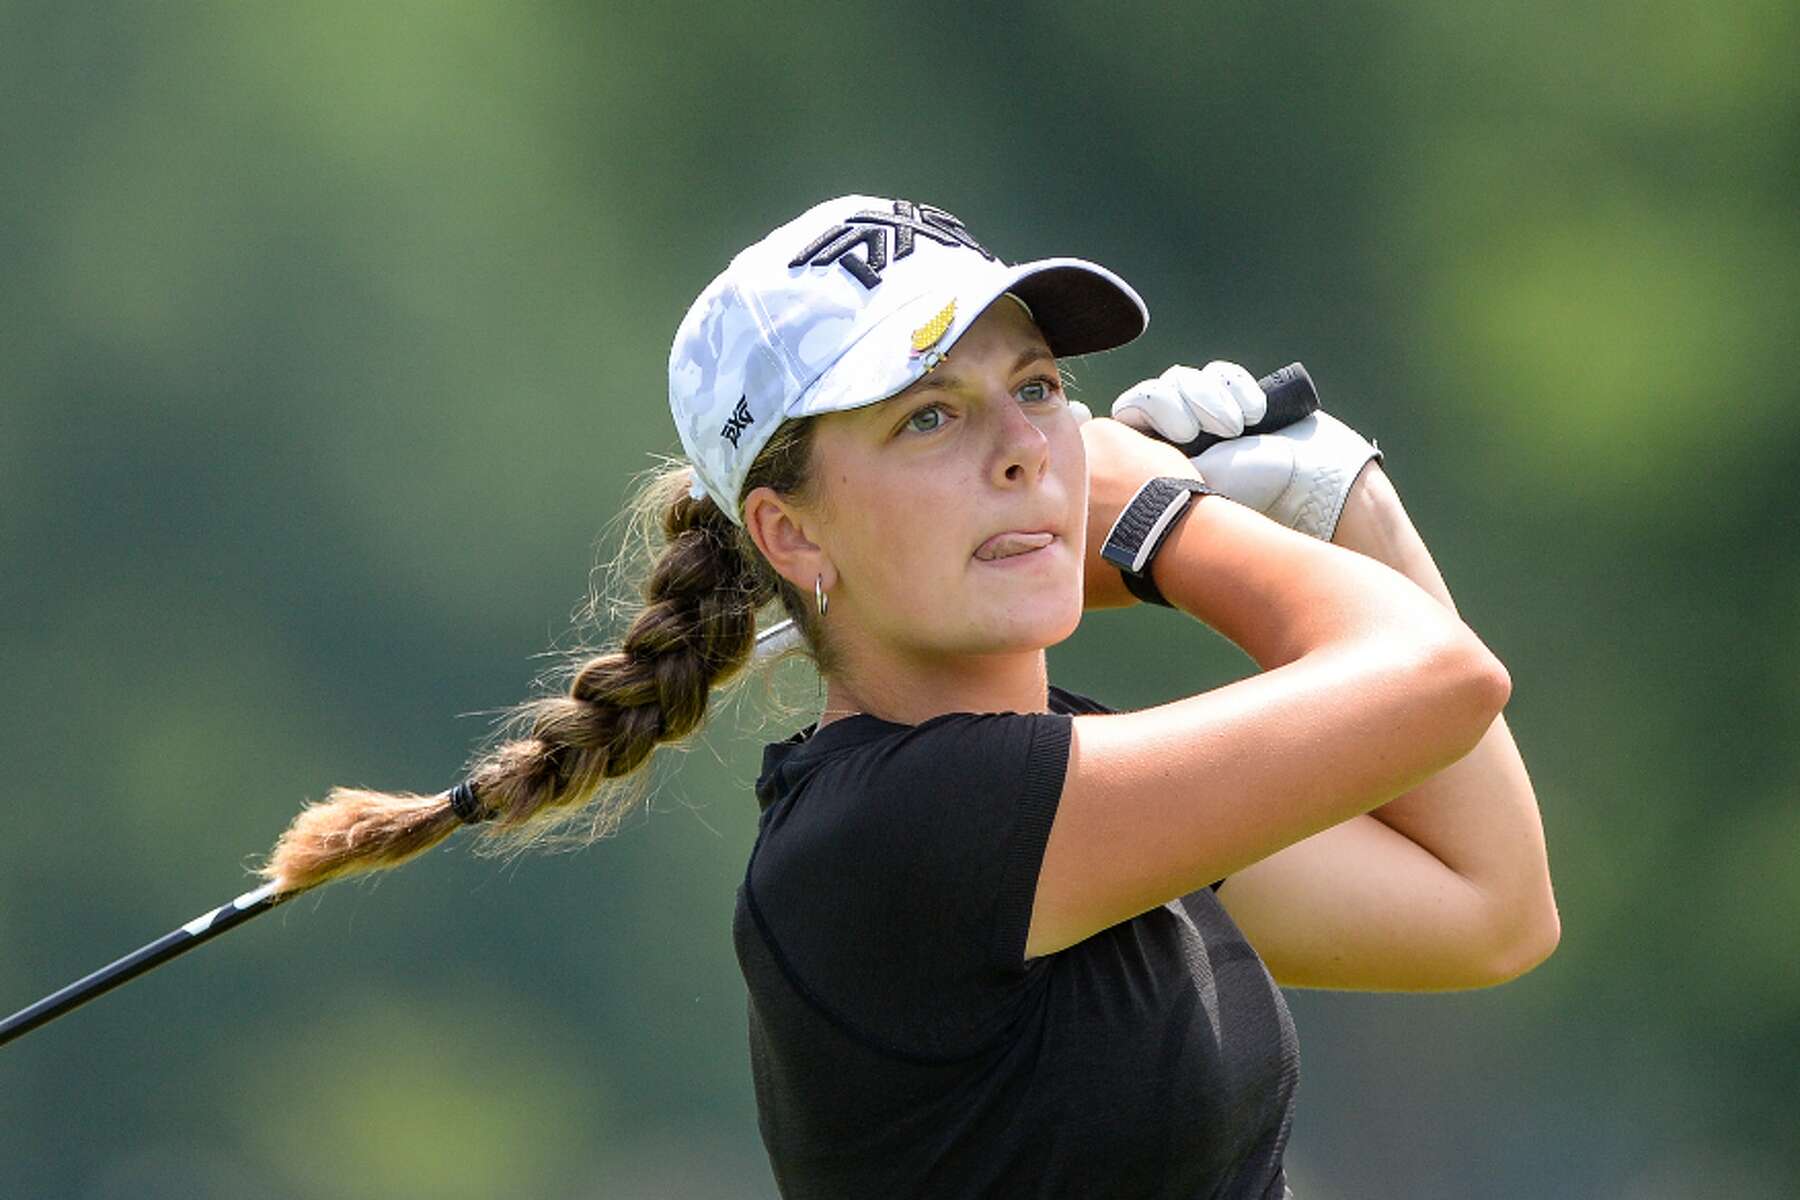 coal No way academic Kennedy Swedick qualifies for match play at U.S. Girls' Junior